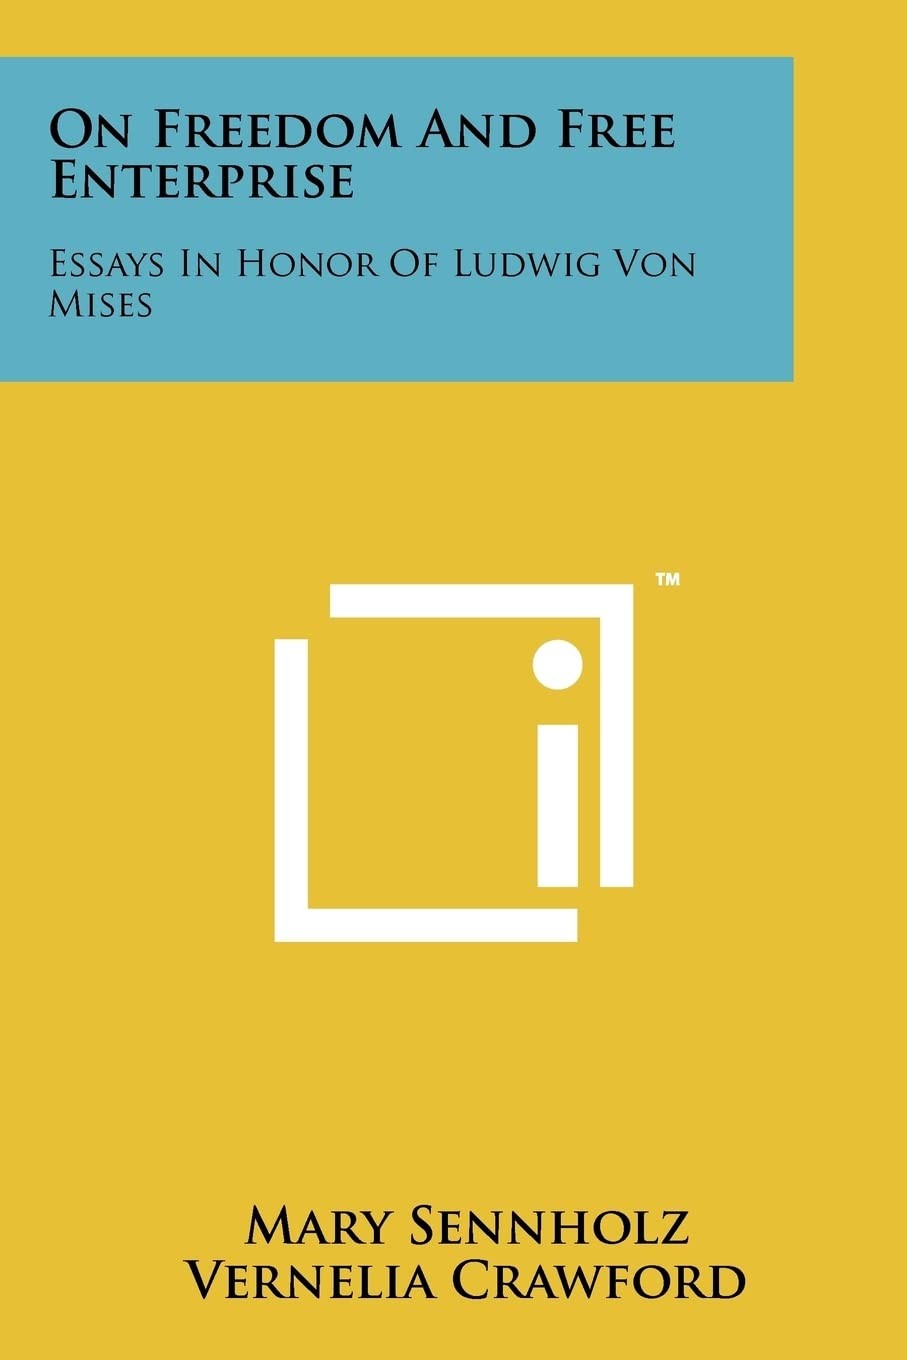 On Freedom and Free Enterprise: Essays in Honor of Ludwig Von Mises